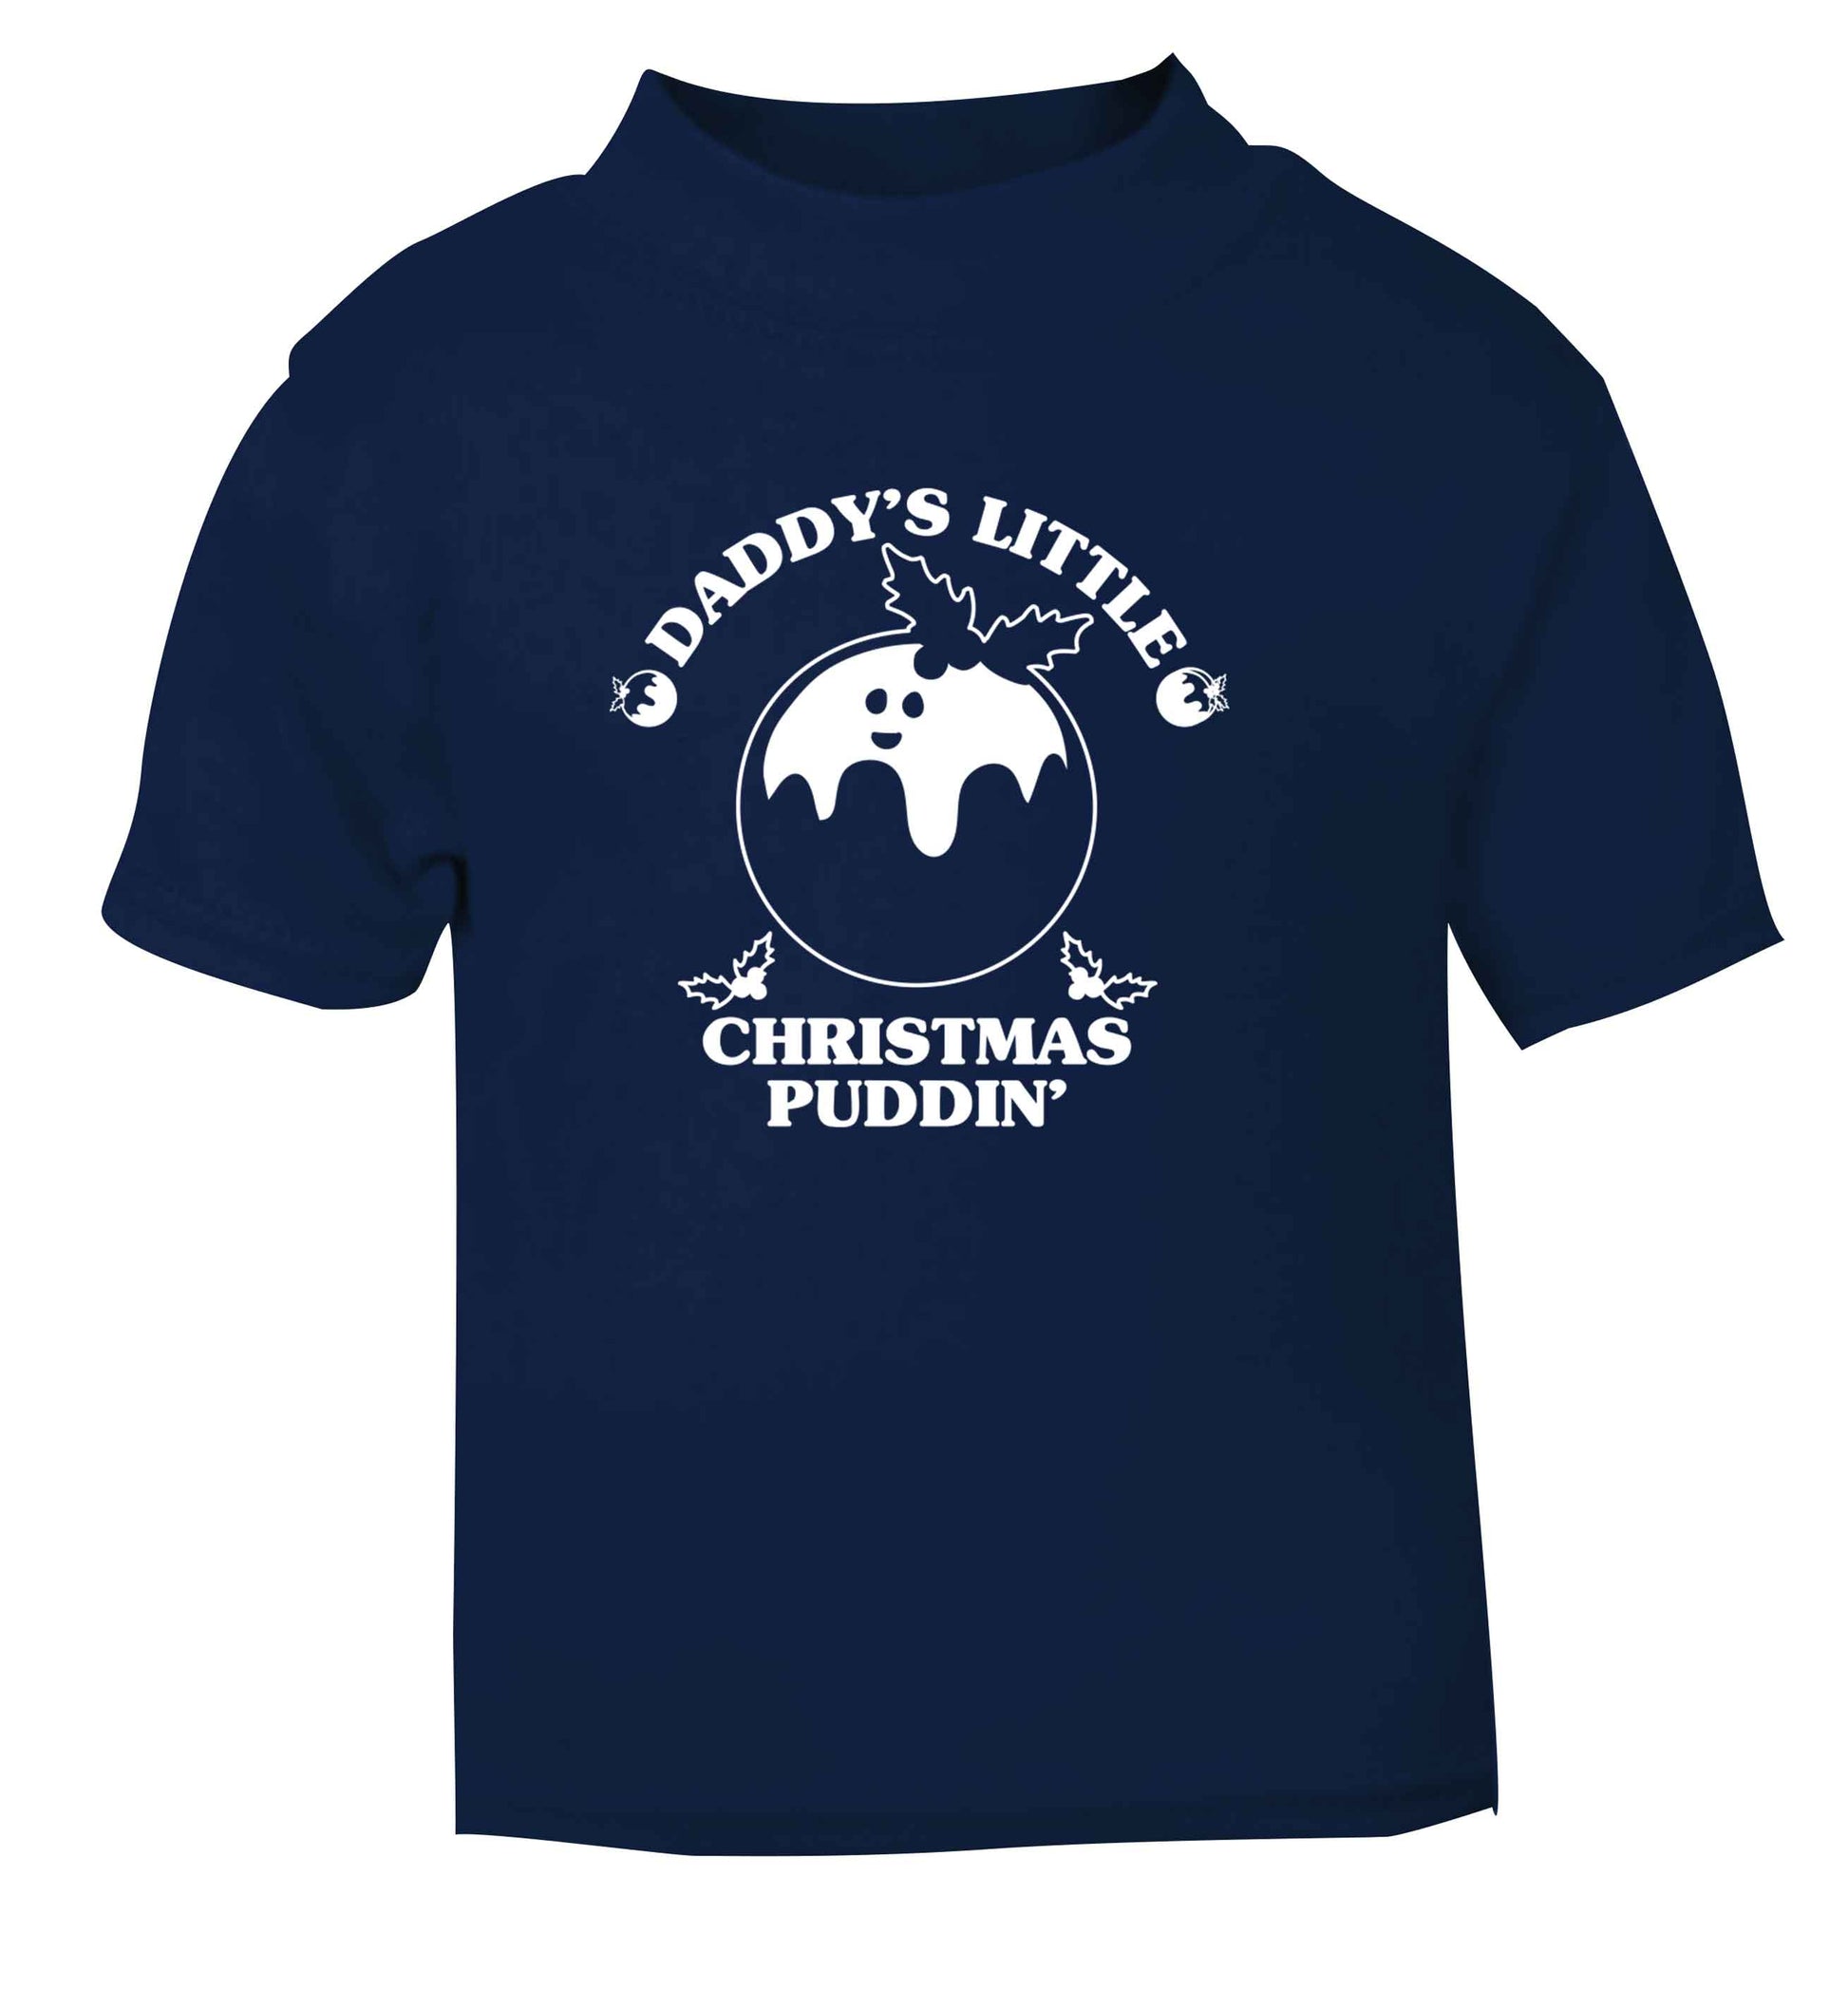 Daddy's little Christmas puddin' navy Baby Toddler Tshirt 2 Years